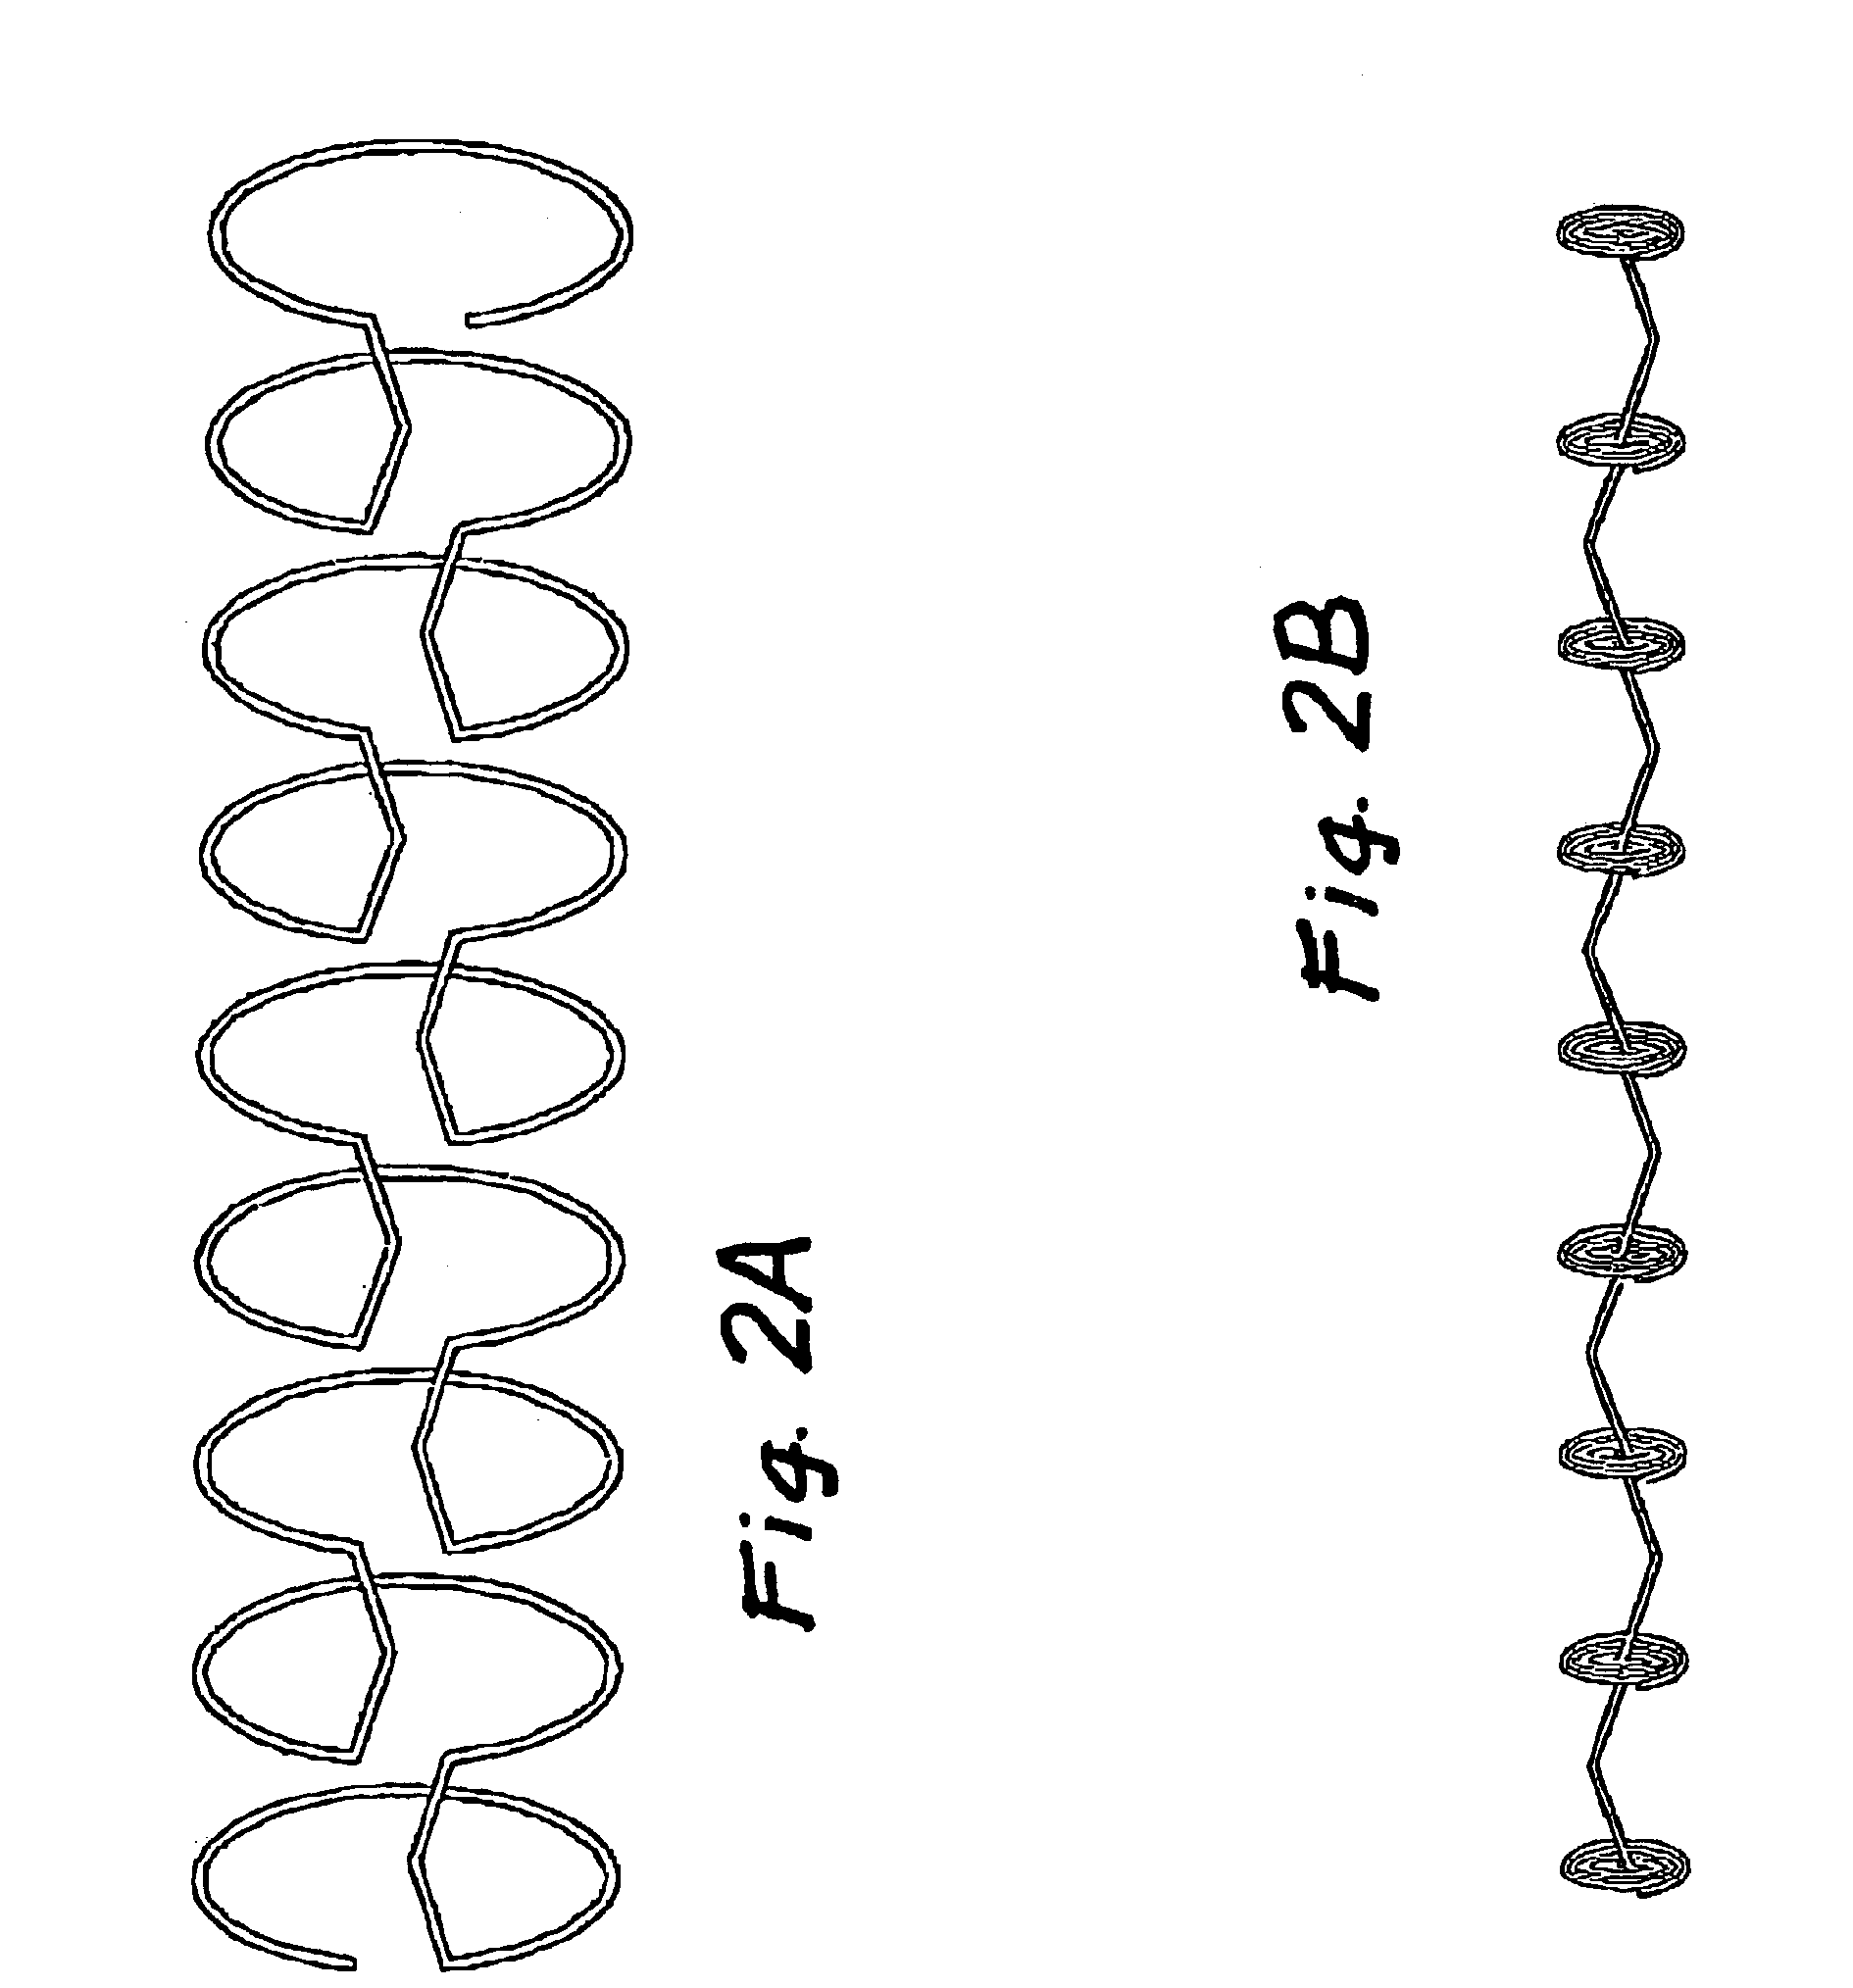 Methods And Apparatus For Treating Aneurysms And Other Vascular Defects